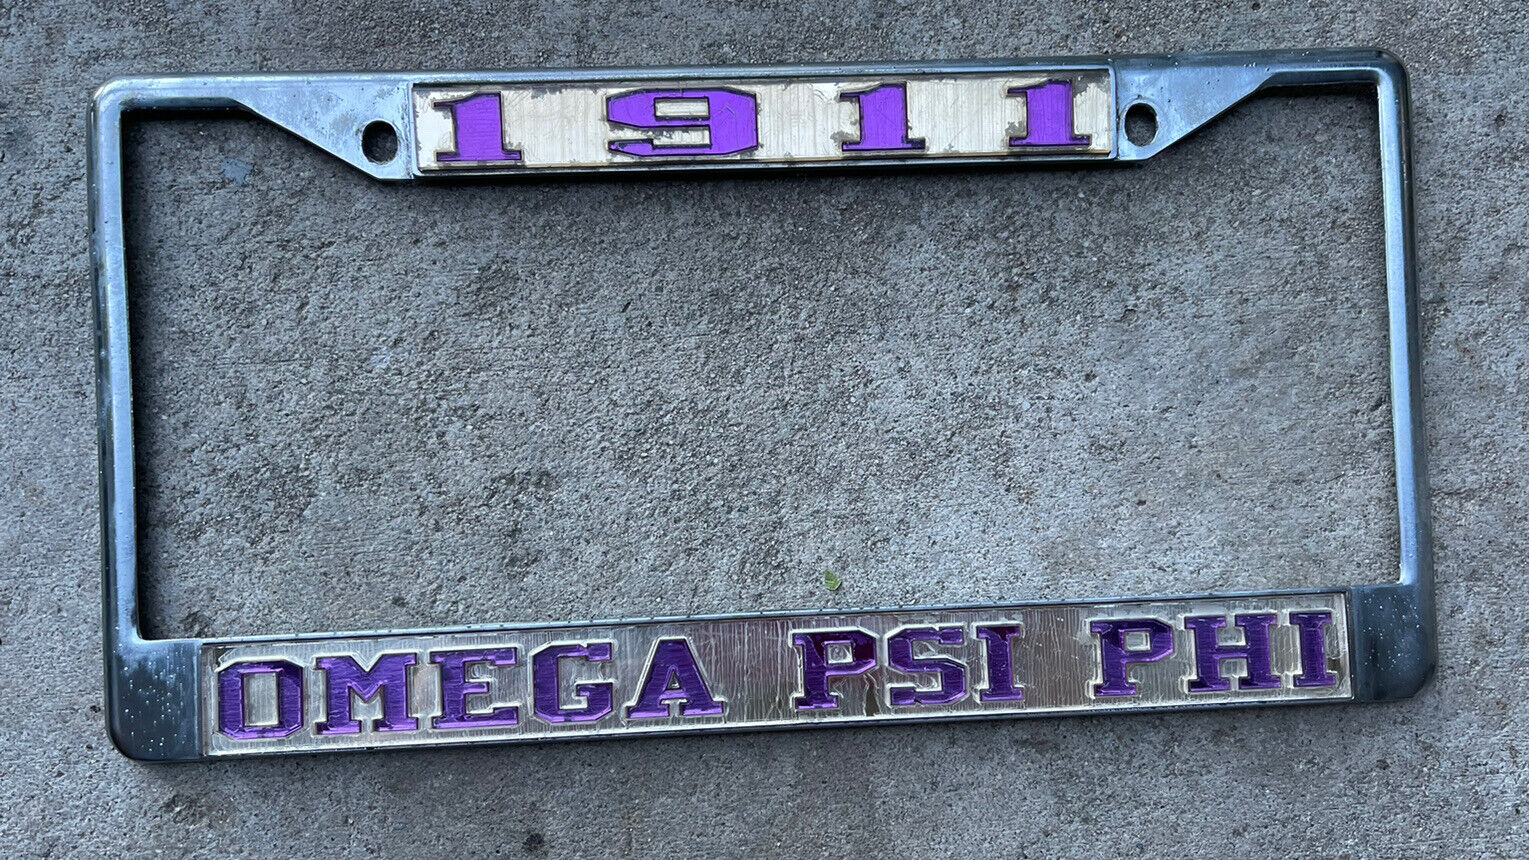 Omega Psi Phi Founding Year License Plate Frame - Purple / Gold nice USED